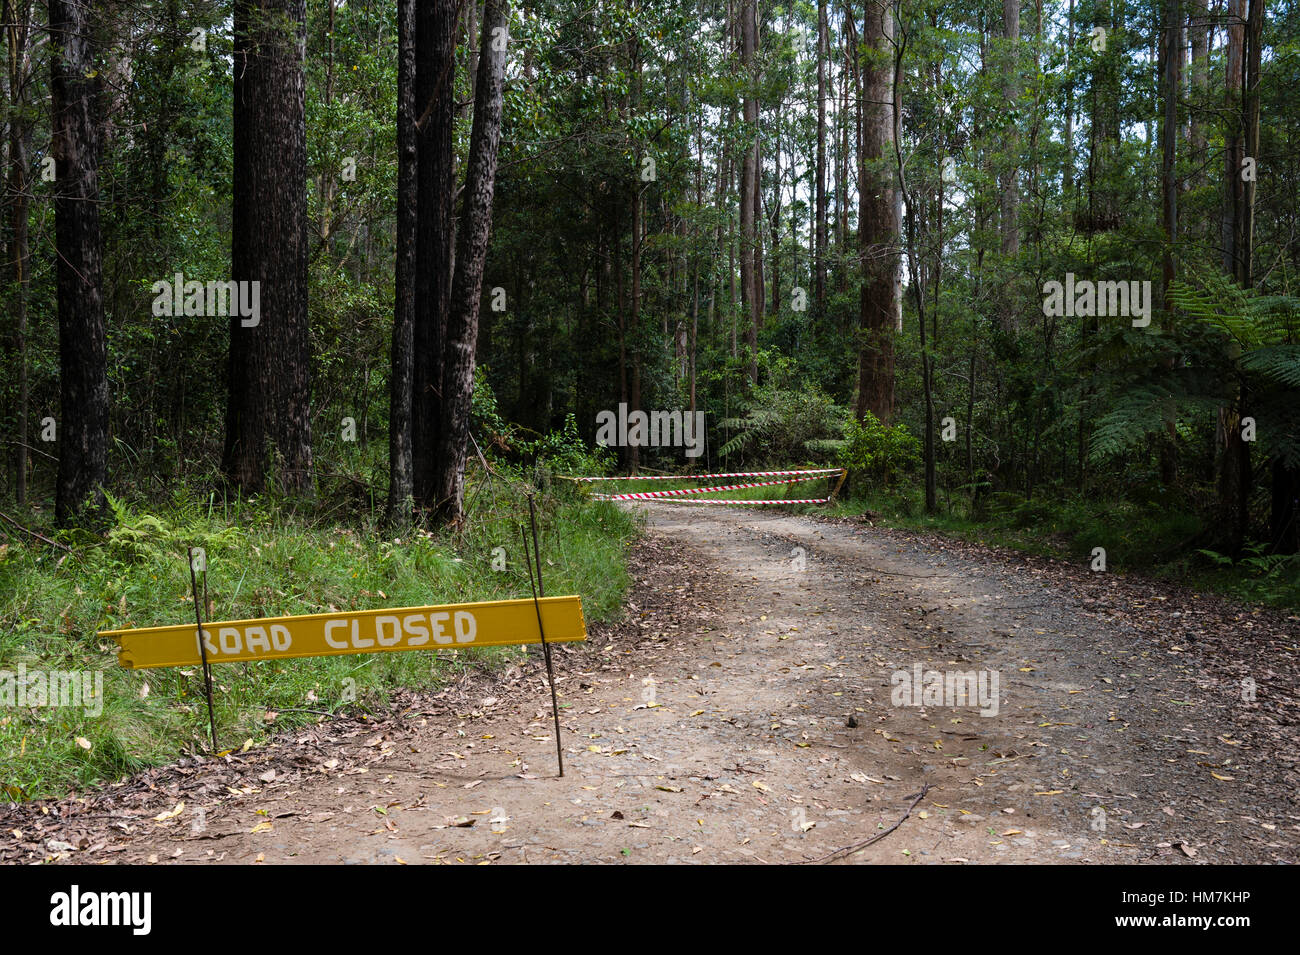 Emergency services road closed sign on a forest track during bushfires. Stock Photo